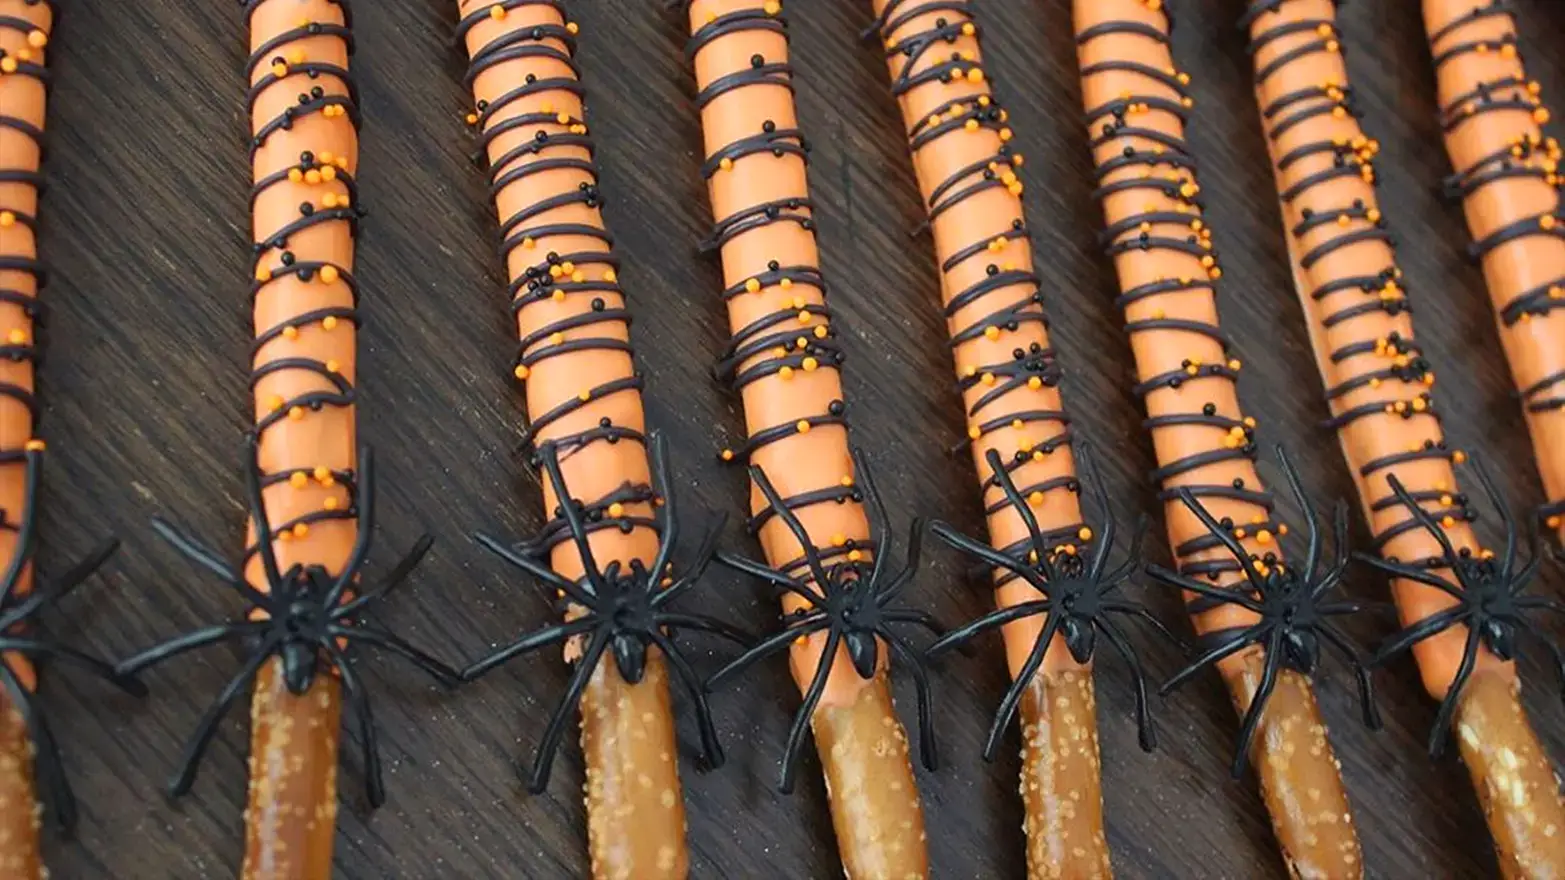 Chocolate dipped pretzels with plastic spiders